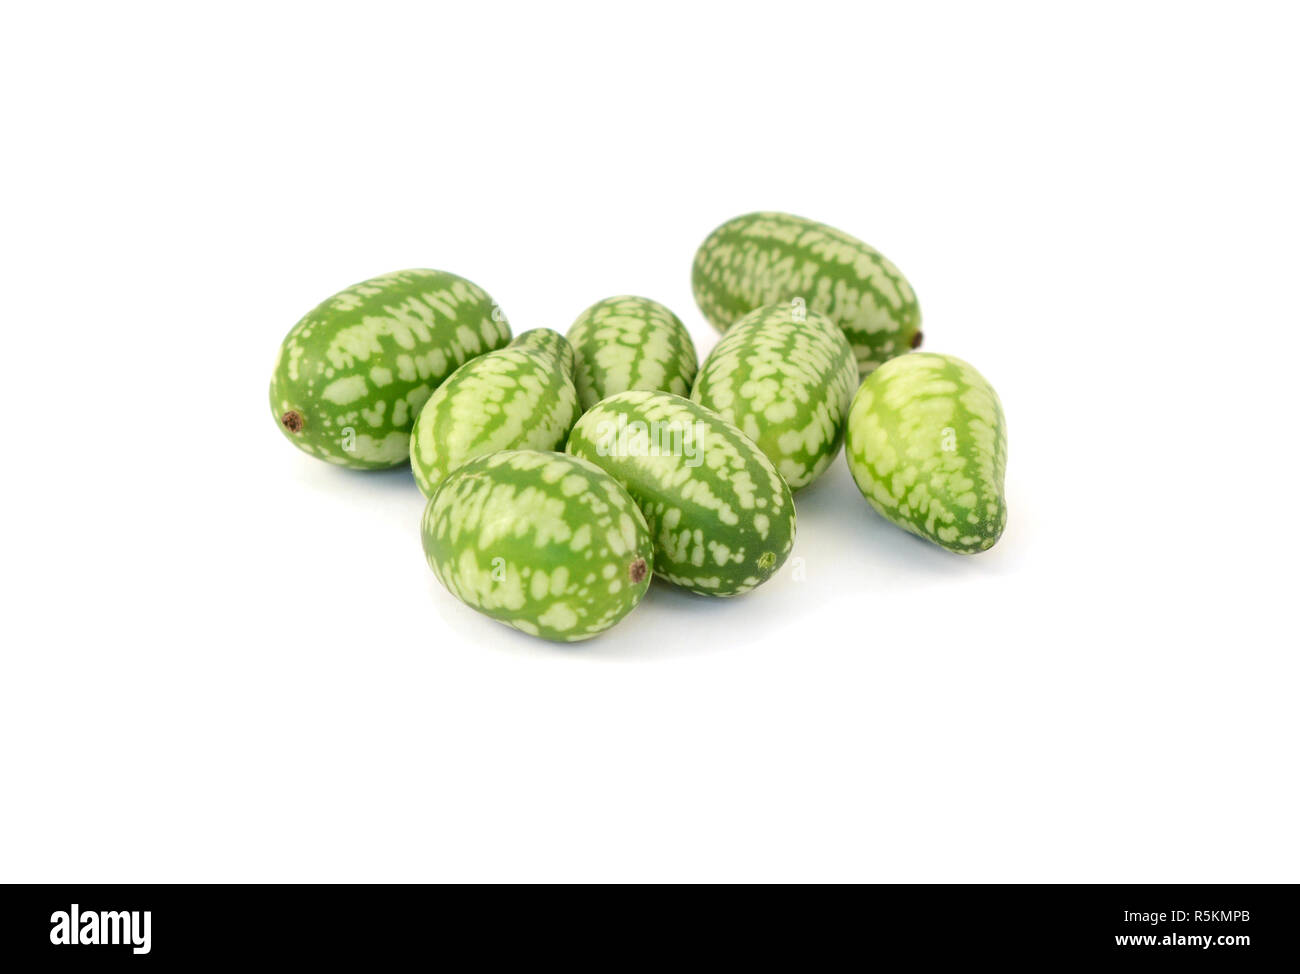 Group of cucamelons or Mexican sour gherkins Stock Photo